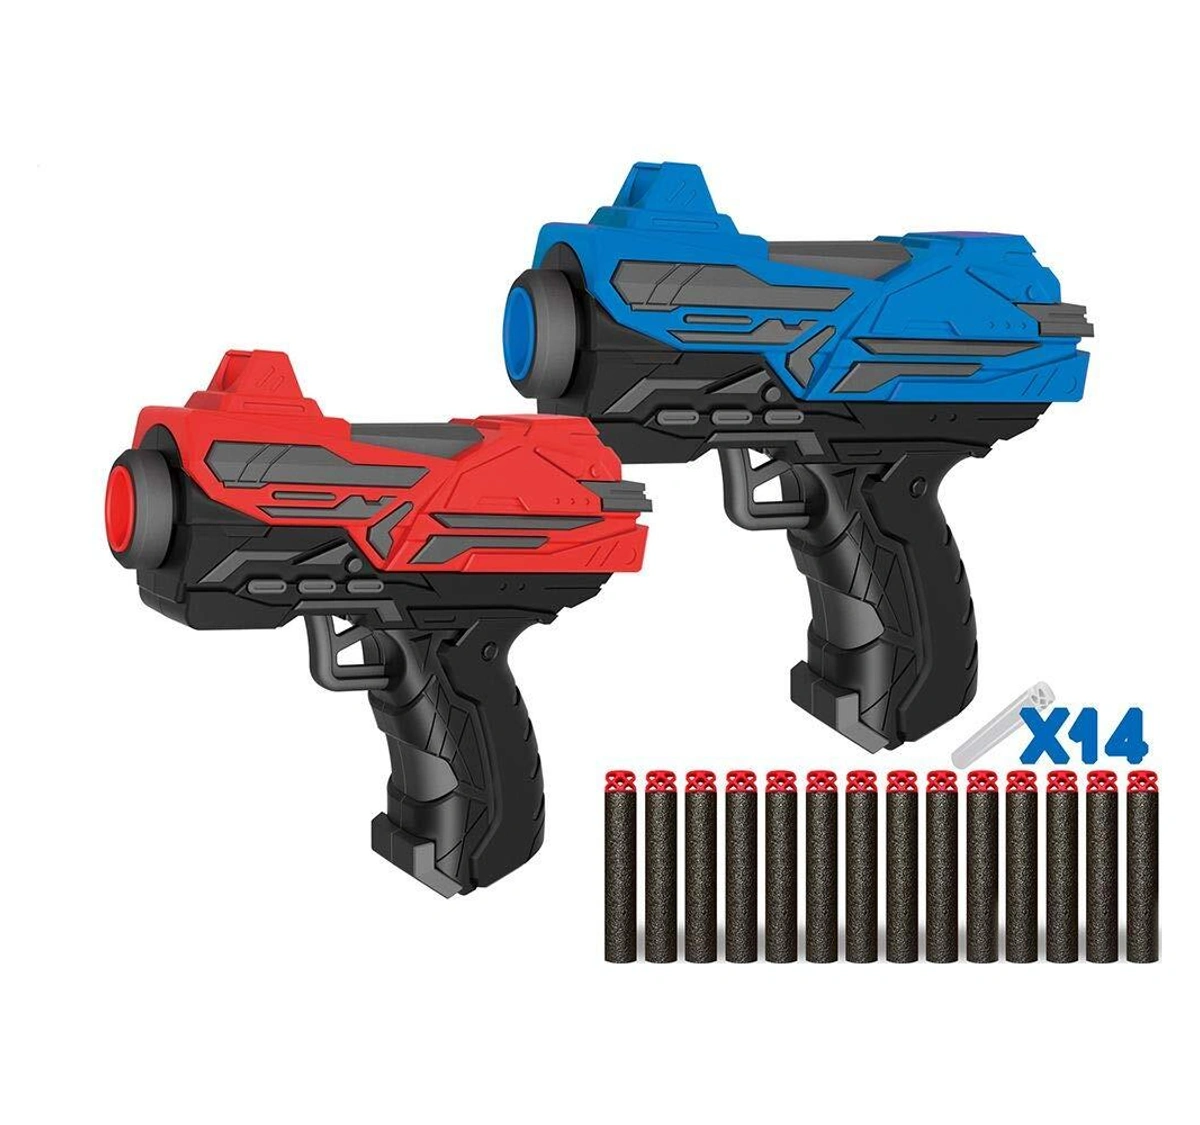 Buy Dual Soft Rubber Foam Bullets Action Gun 2 with 14 Piece Darts